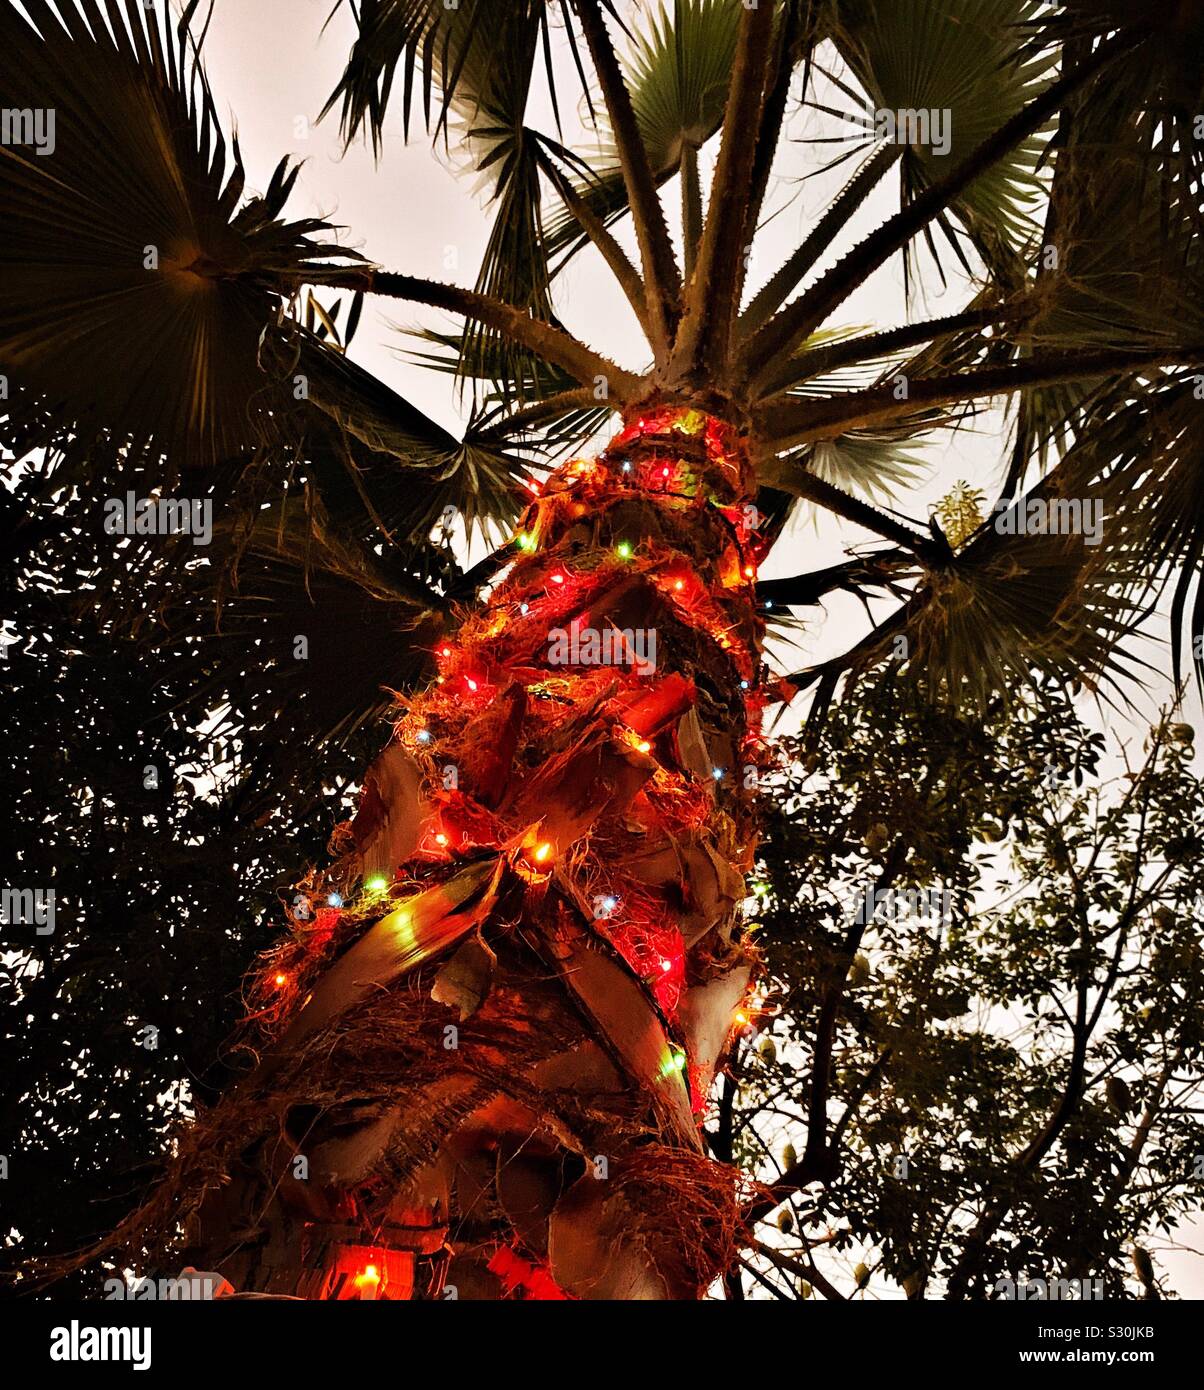 Strings of colored lights are wrapped around the trunk of an outdoor palm tree in December. Stock Photo